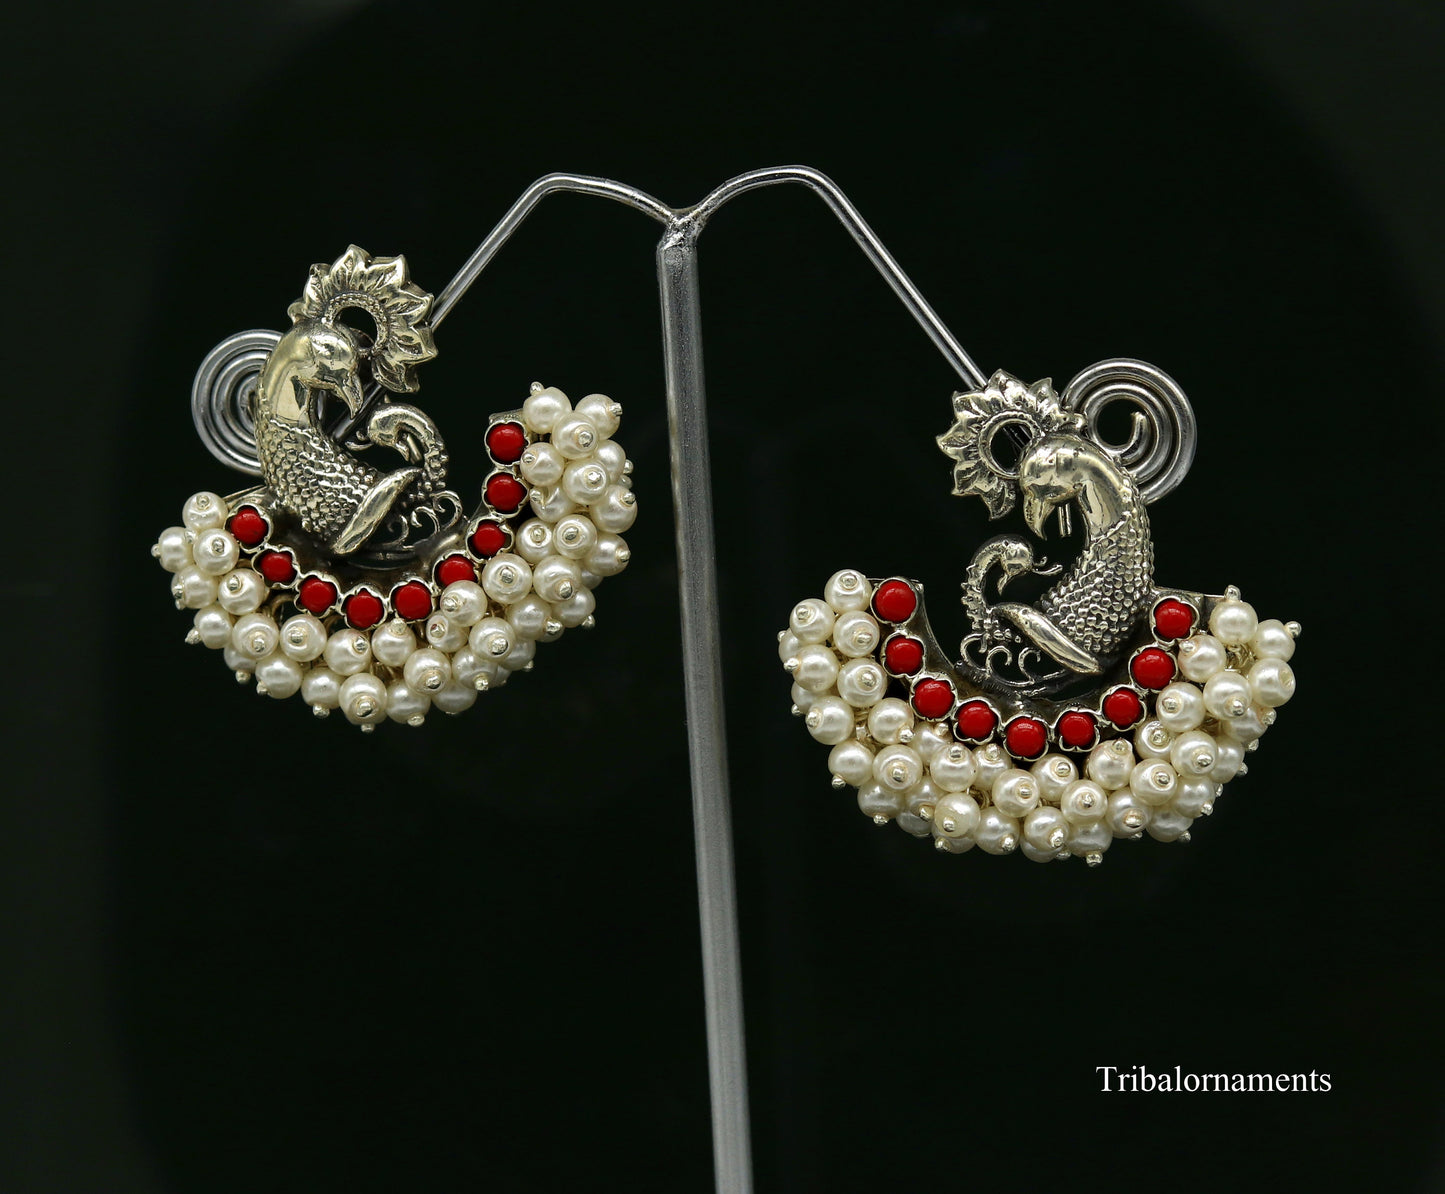 925 sterling silver handmade gorgeous peacock design stud earring with gorgeous red and pearl stone customized earring tribal jewelry s859 - TRIBAL ORNAMENTS